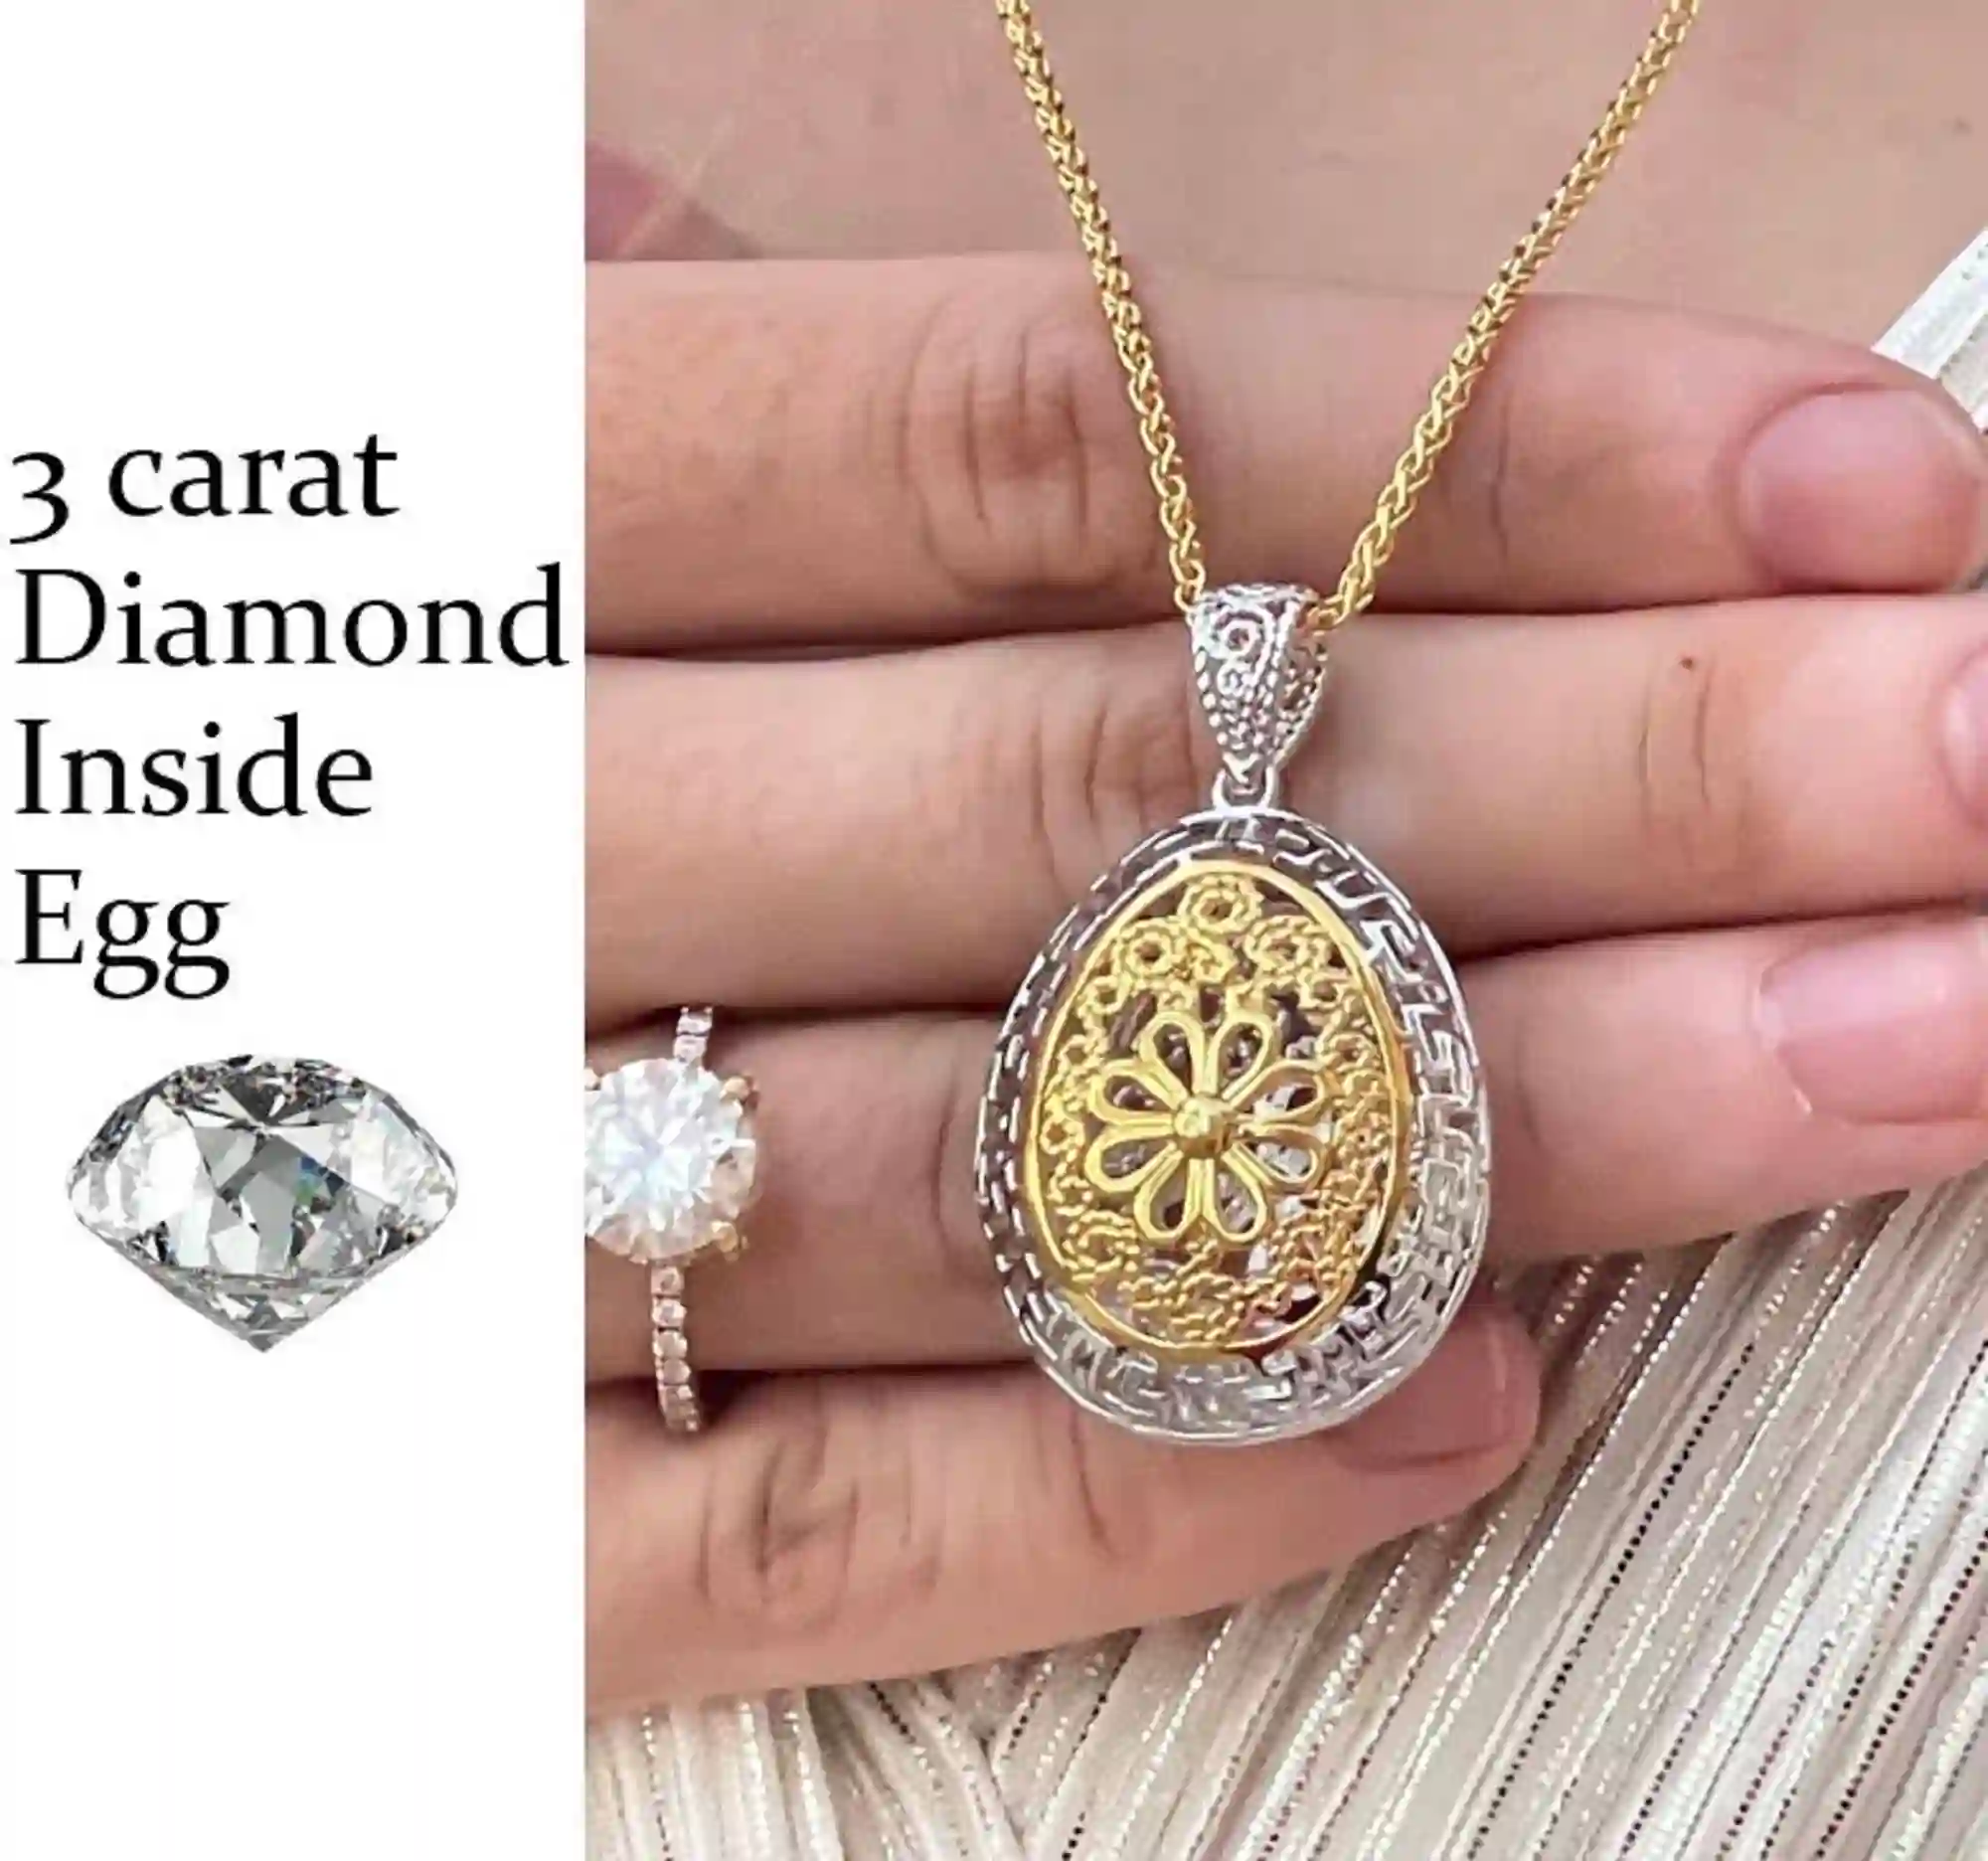 3 carat Diamond Bridal Necklace, Faberge egg style Love Jewelry, Infinity Gifts for Bridal Shower, Faberge Diamond Pendant Necklace Wedding 